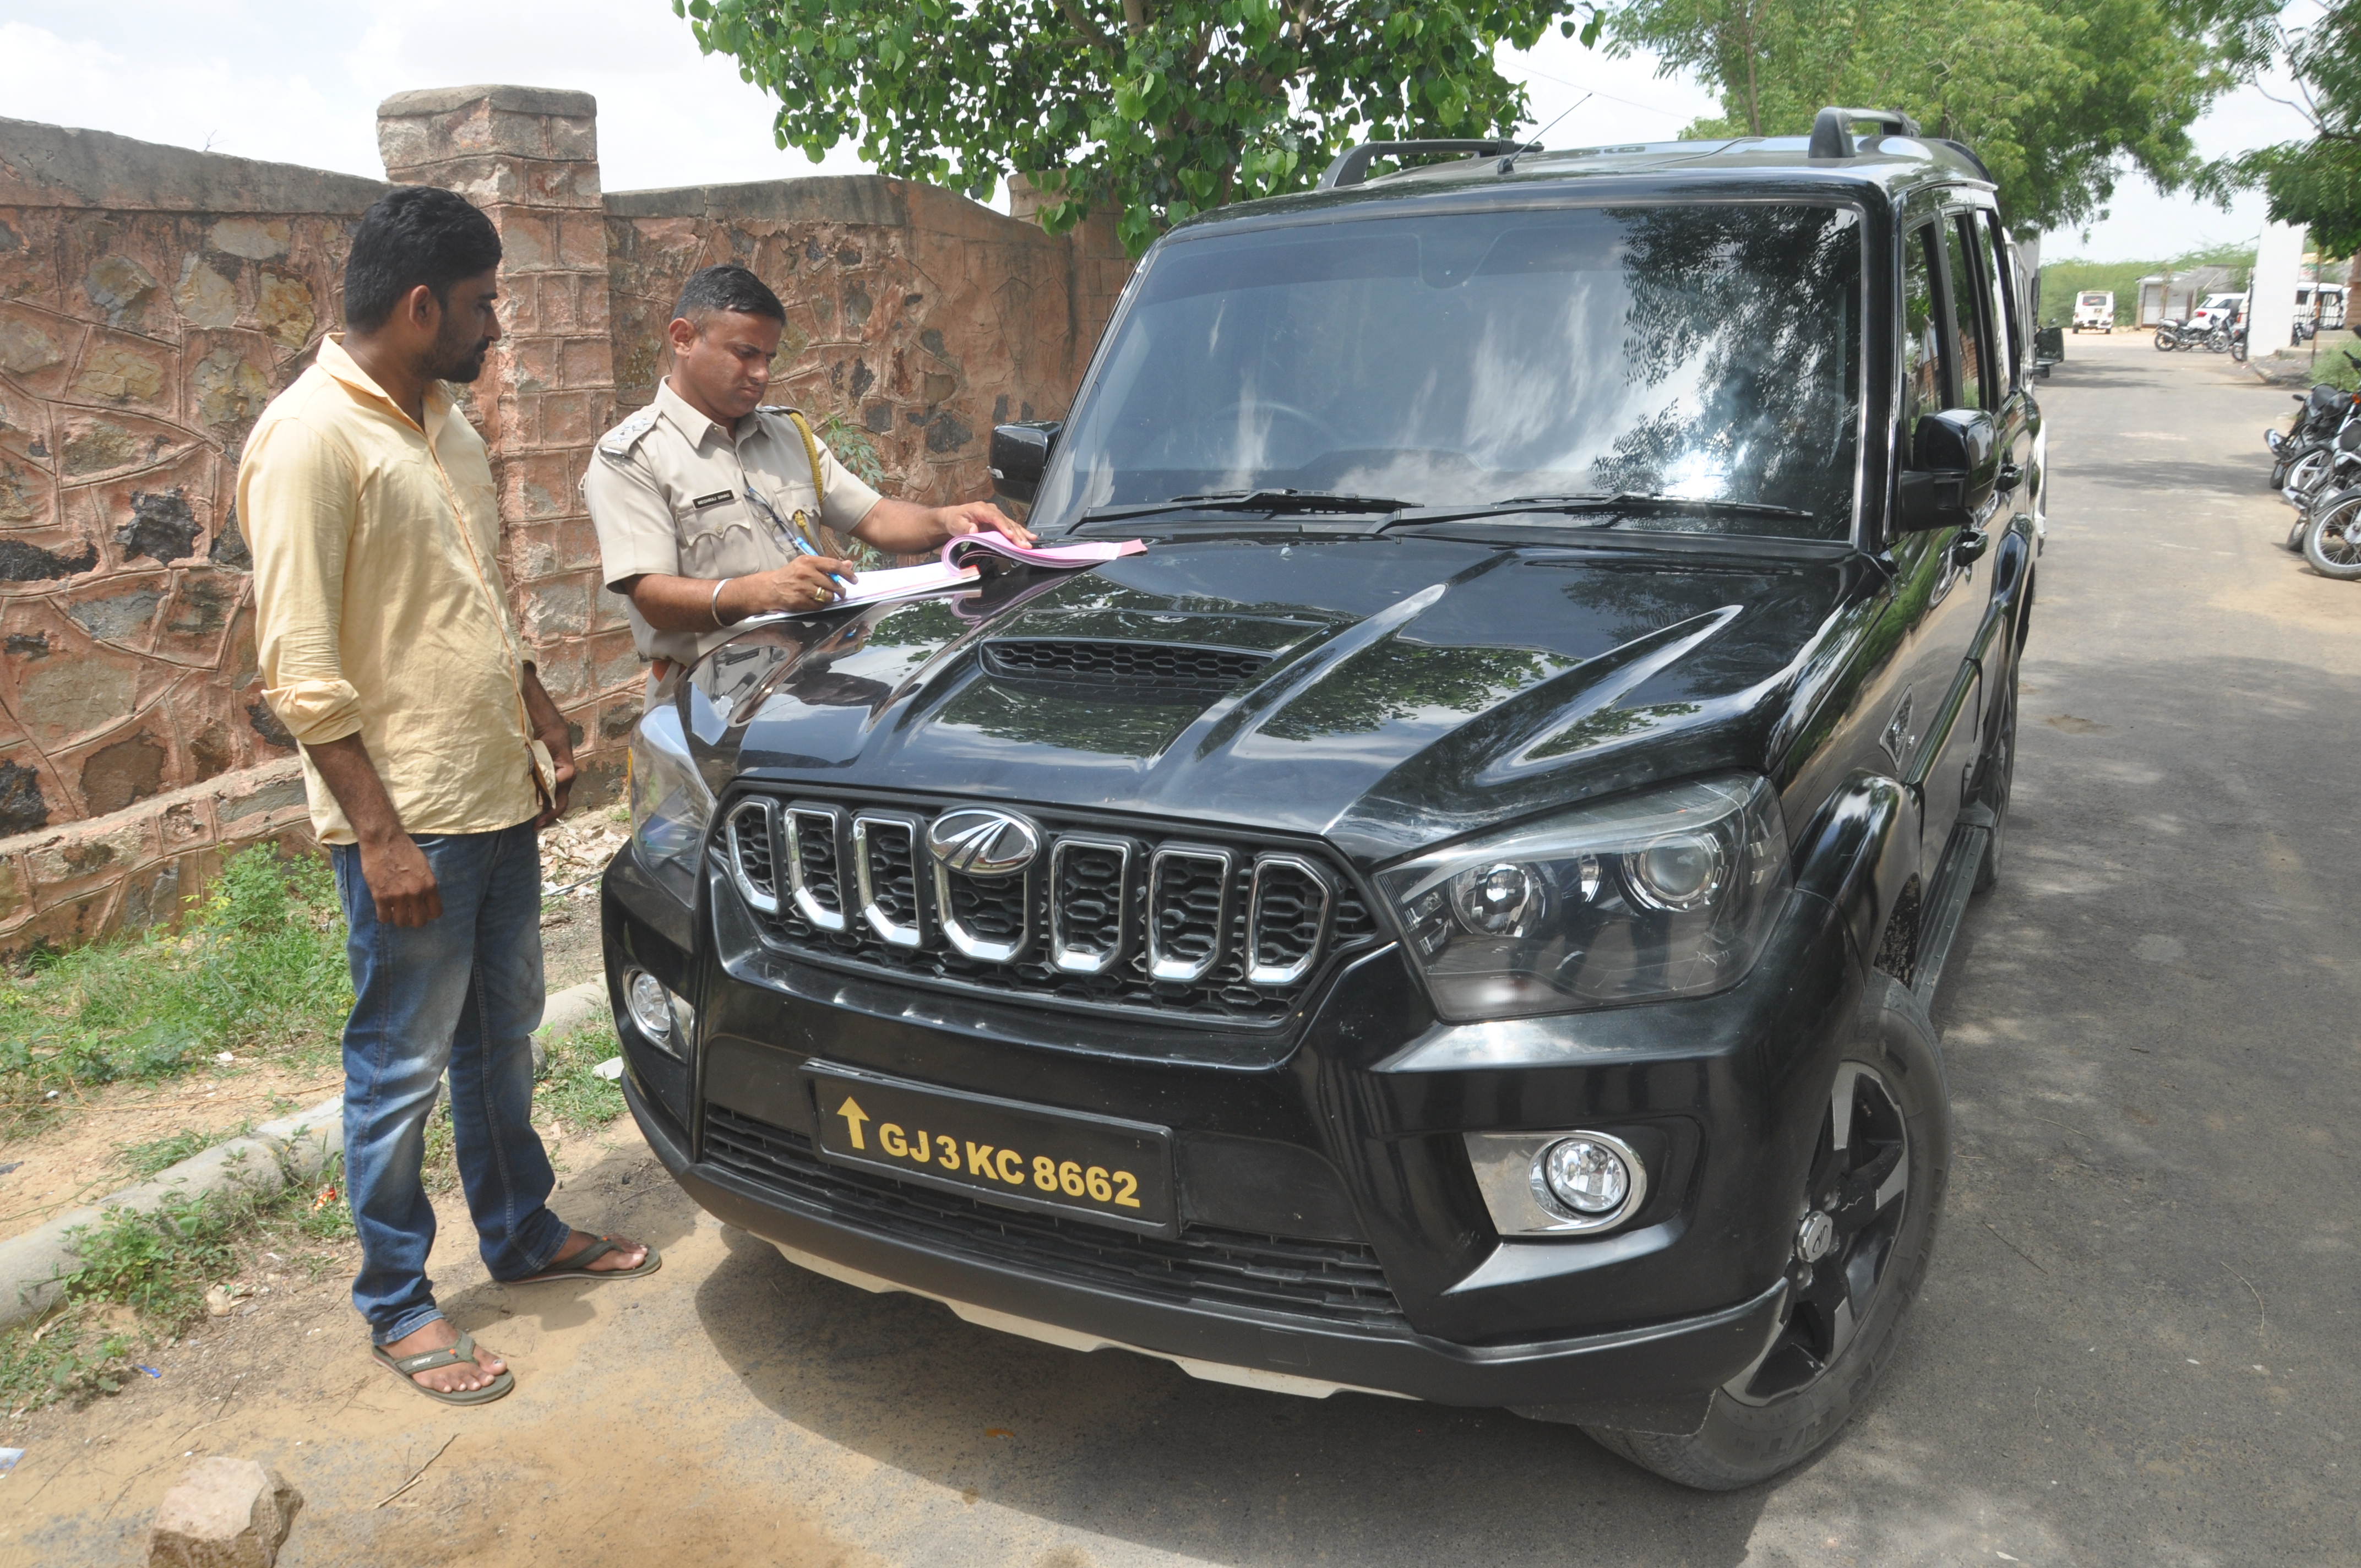 One arrested for putting army mark on number plate